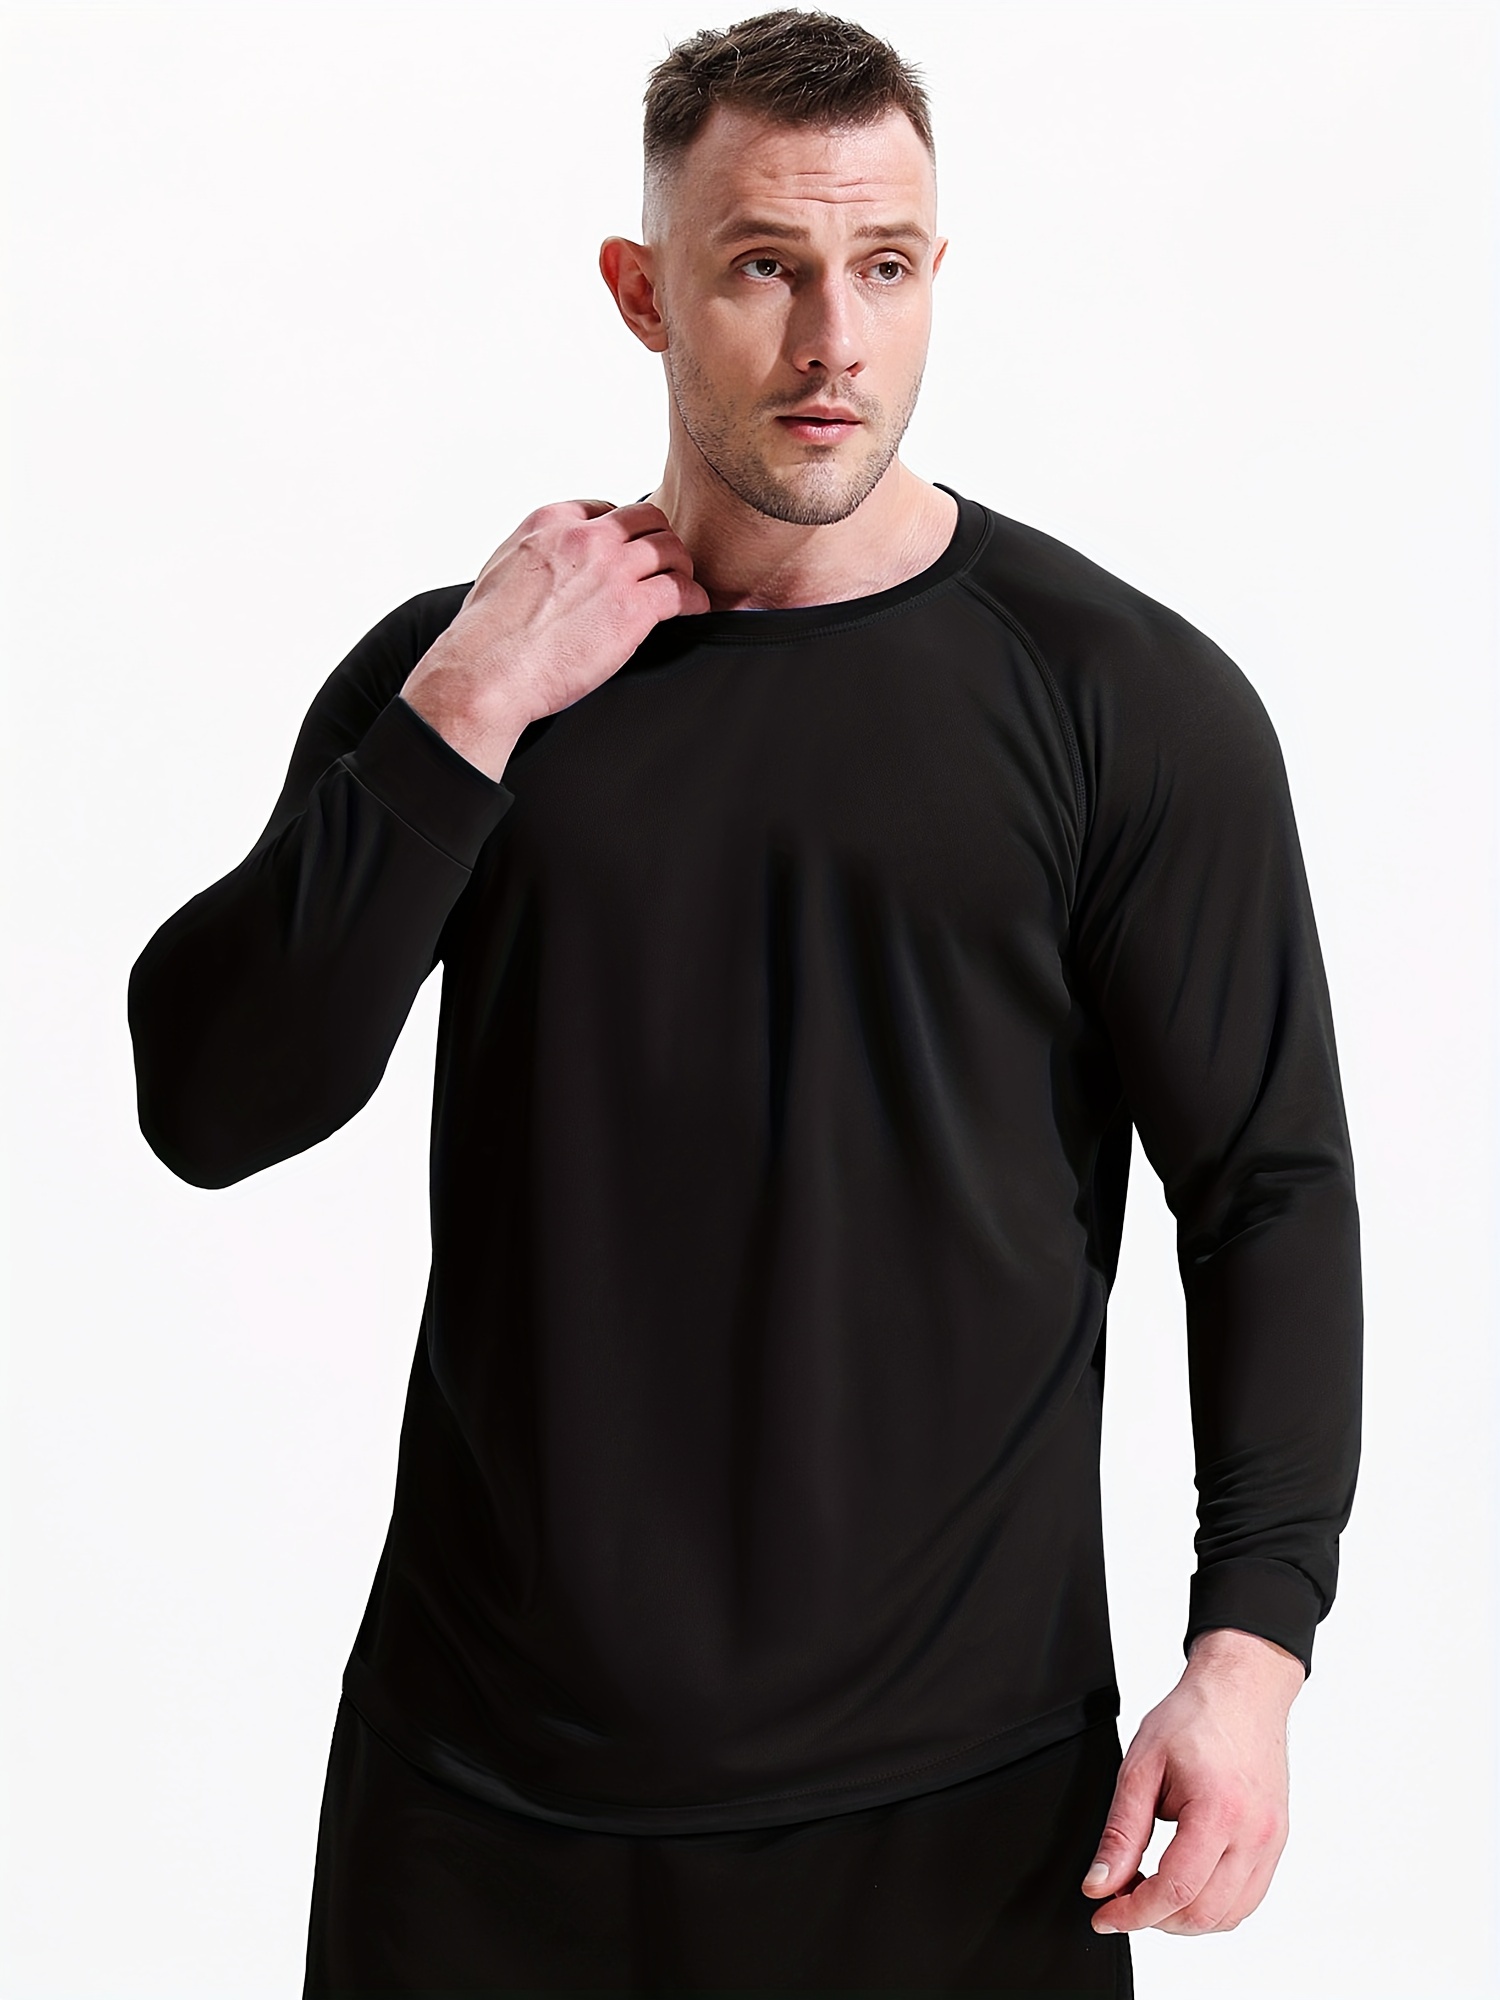 Baleaf Mens Long Sleeve Running Workout Shirts Quick Dry Athletic Gym  T-Shirts Lightweight Soft Tee Tops Black Size Xxl